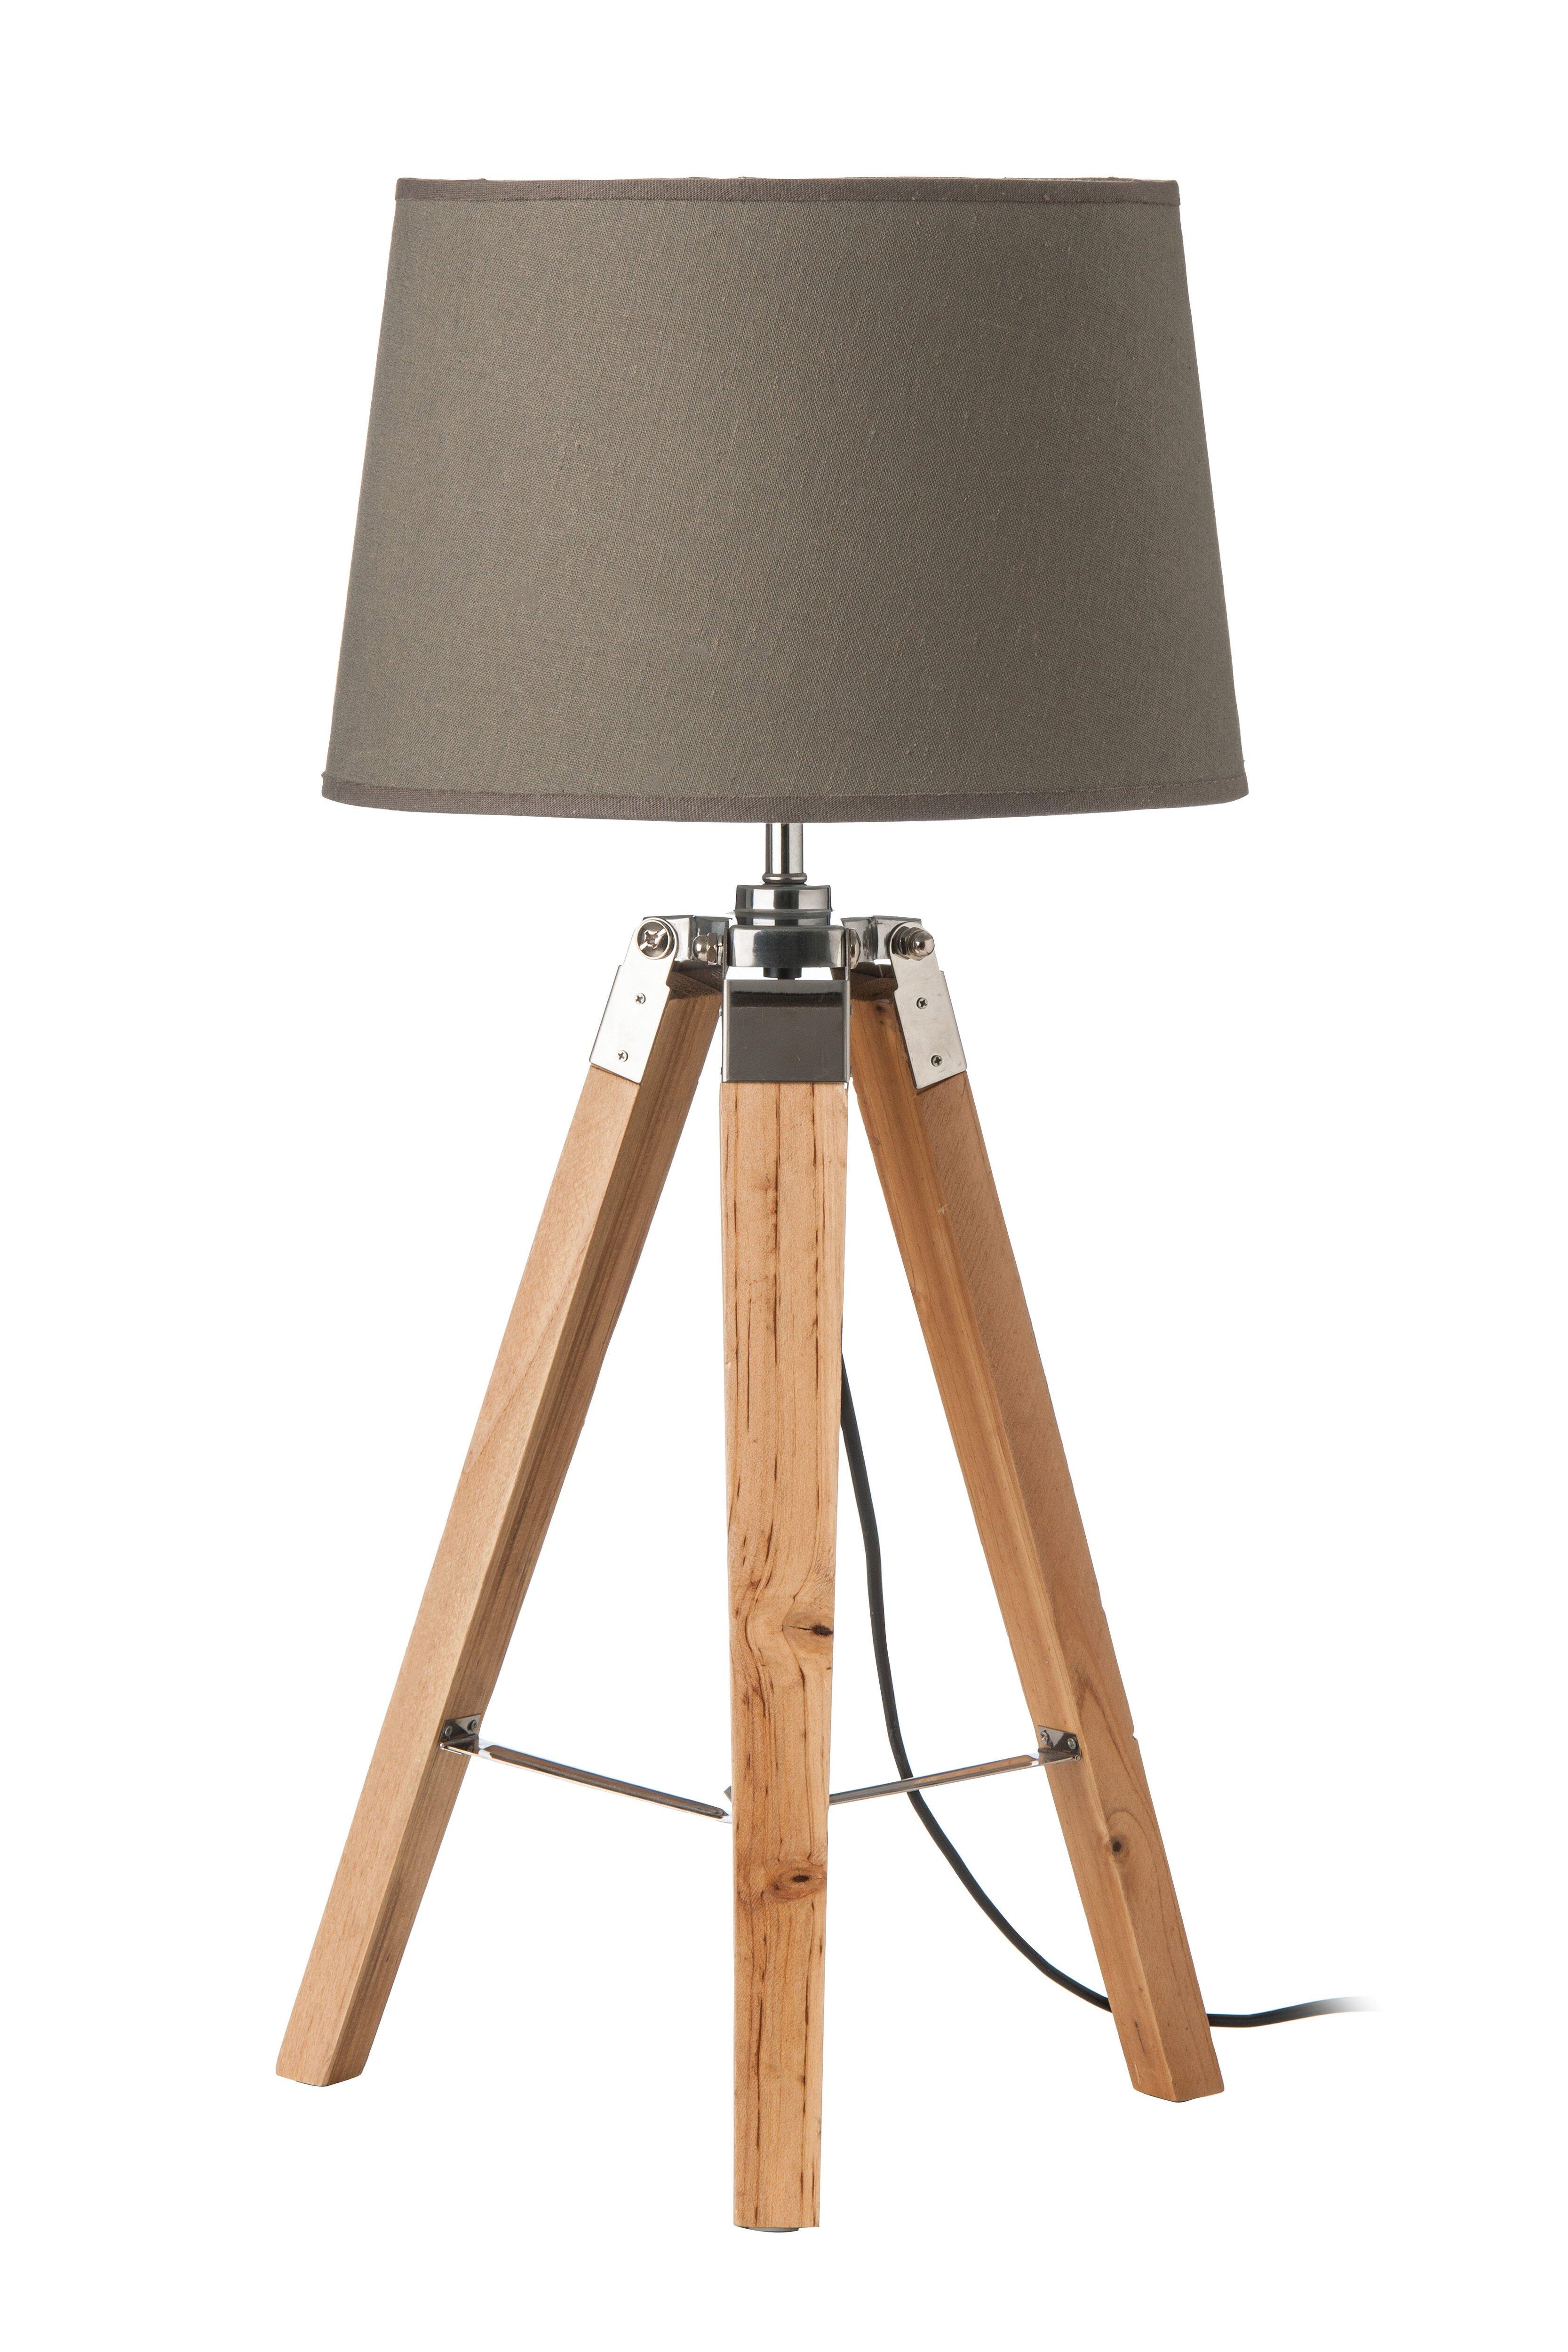 Interiors by Premier Tripod Table Lamp